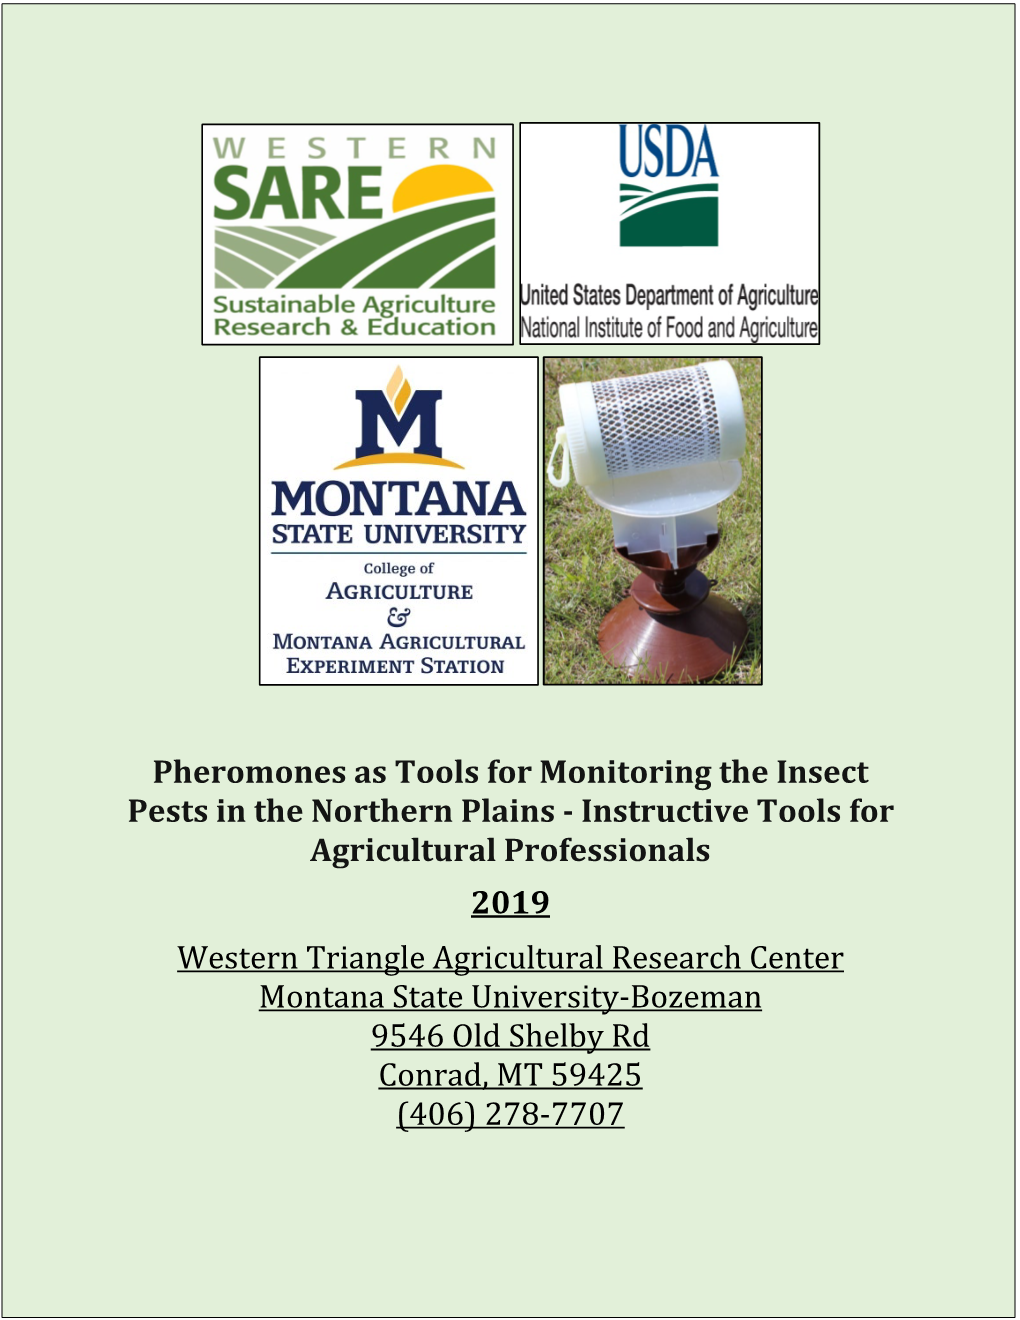 Pheromones As Tools for Monitoring the Insect Pests in the Northern Plains